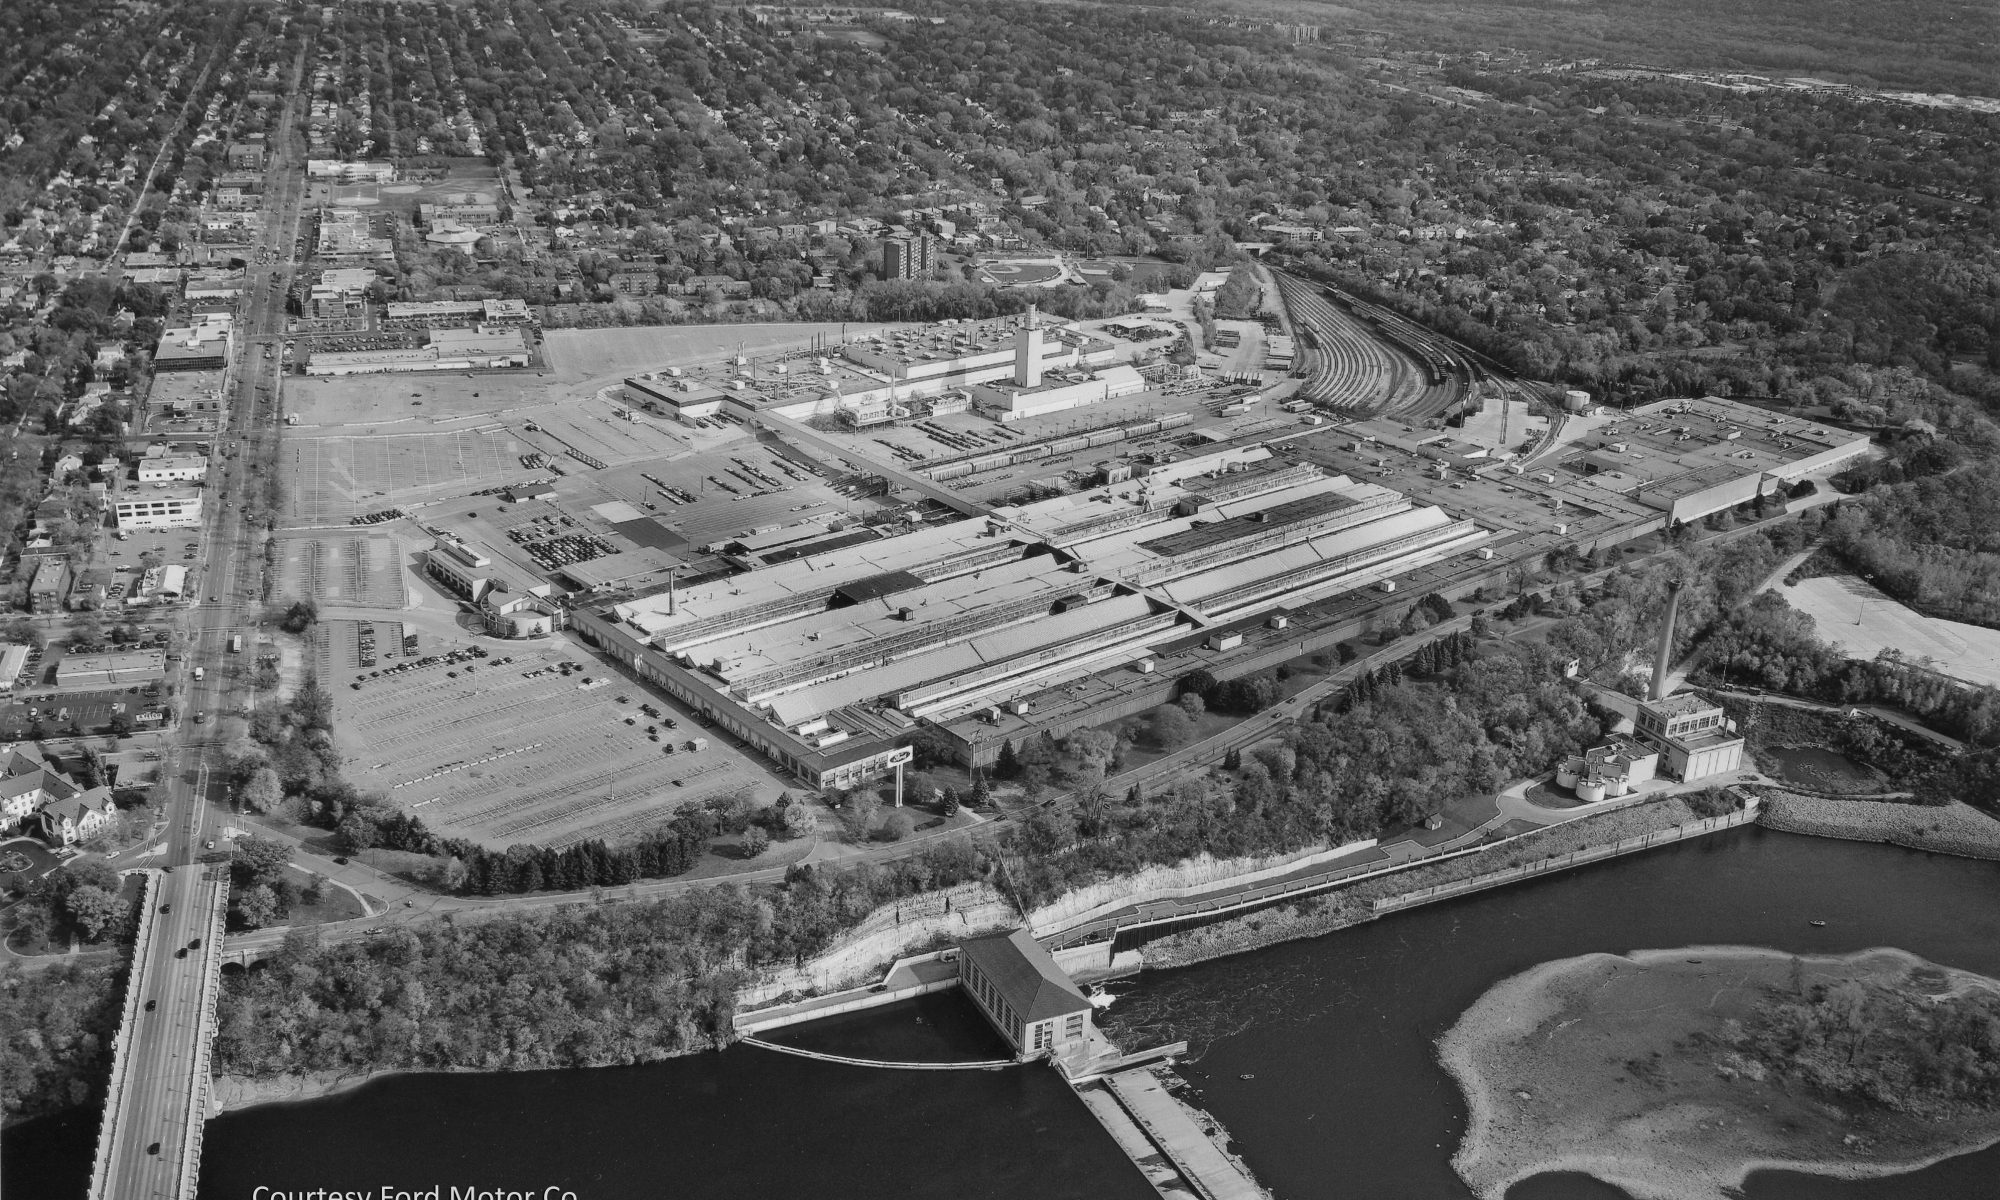 The Twin Cities Assembly Plant, pictured here around 2006, occupied 122 acres adjacent the Mississippi River in Saint Paul. The original plant site consisted of 200 acres, some of which was eventually sold to private developers for the shopping center and apartment buildings along the eastern edge of the property. However, Ford retained the mineral rights under the parcels that had been sold. Courtesy Ford Motor Company